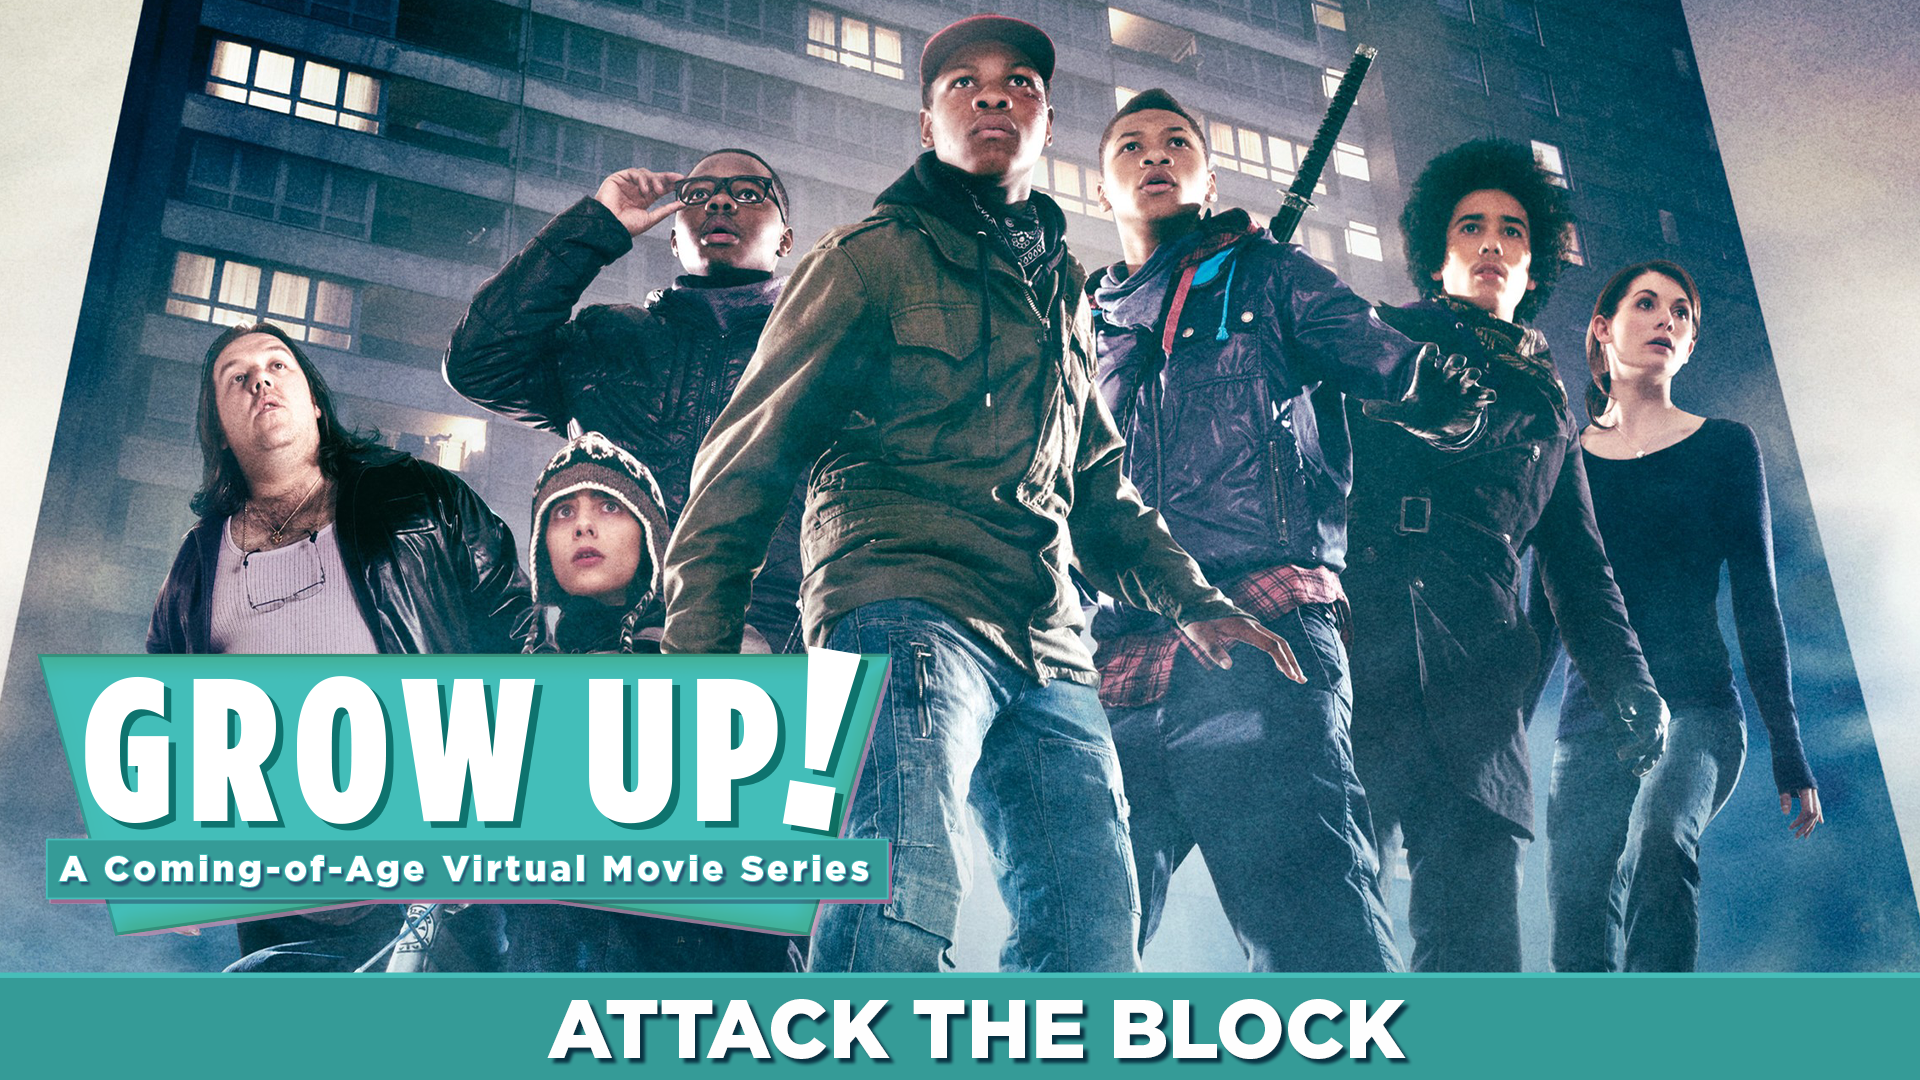 Grow Up! A Coming-of-Age Virtual Movie Series - Attack the Block